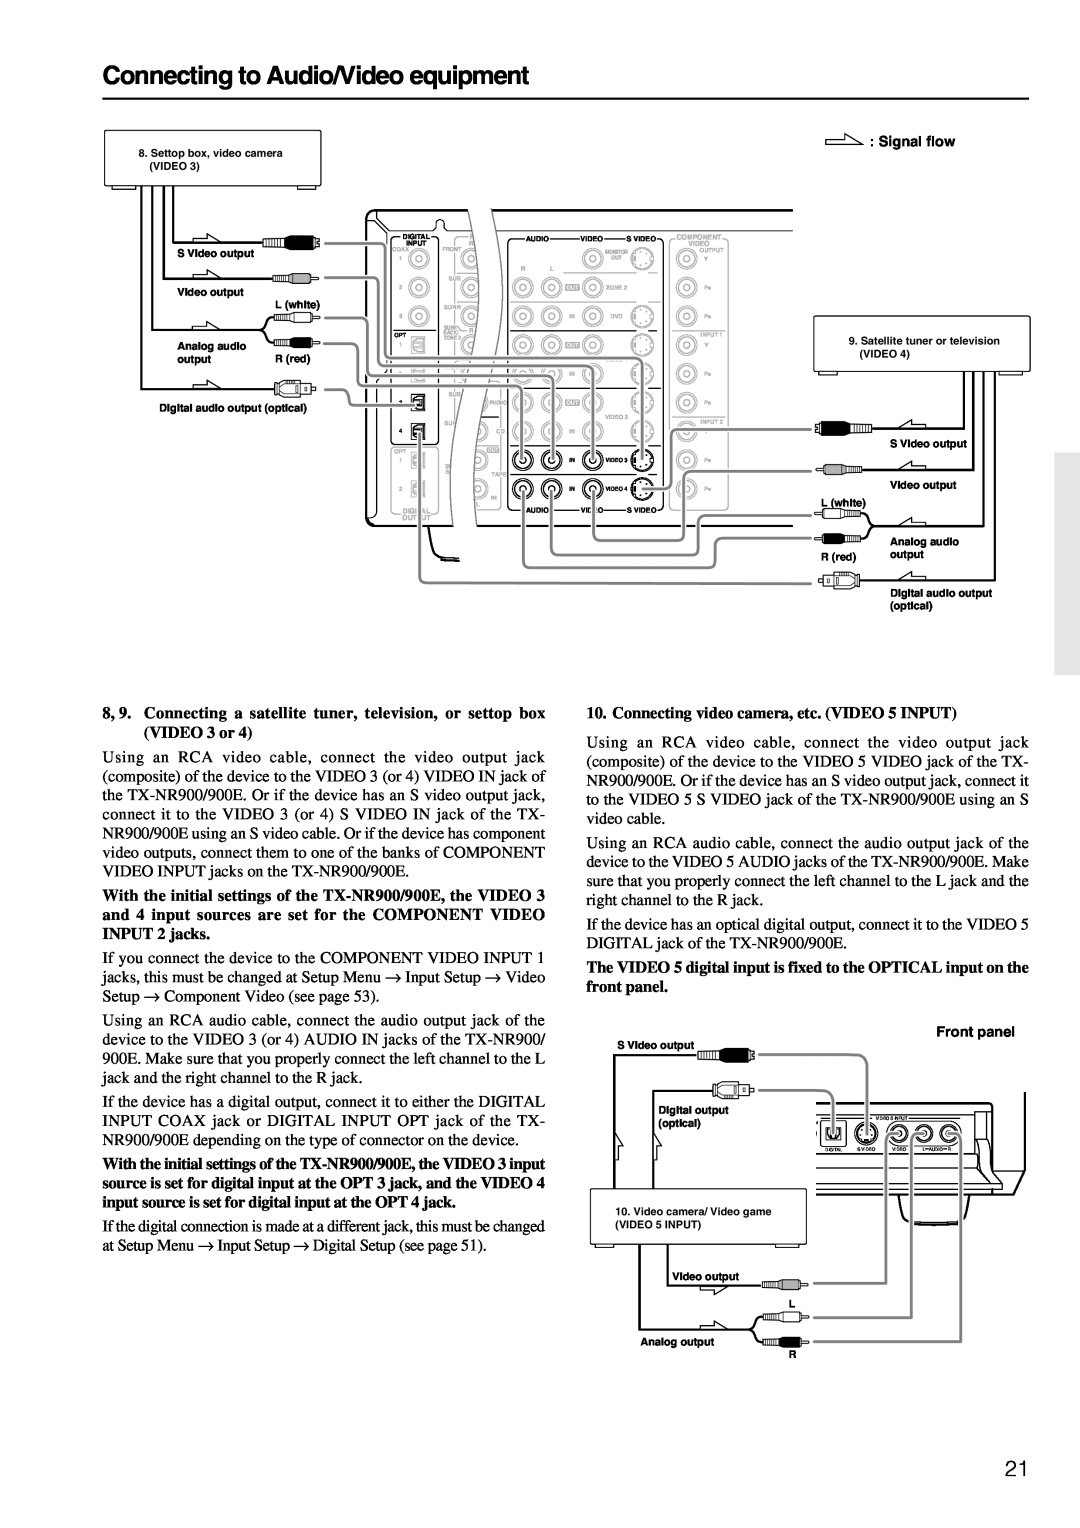 Onkyo TX-NR900E instruction manual Connecting to Audio/Video equipment, Connecting video camera, etc. VIDEO 5 INPUT 